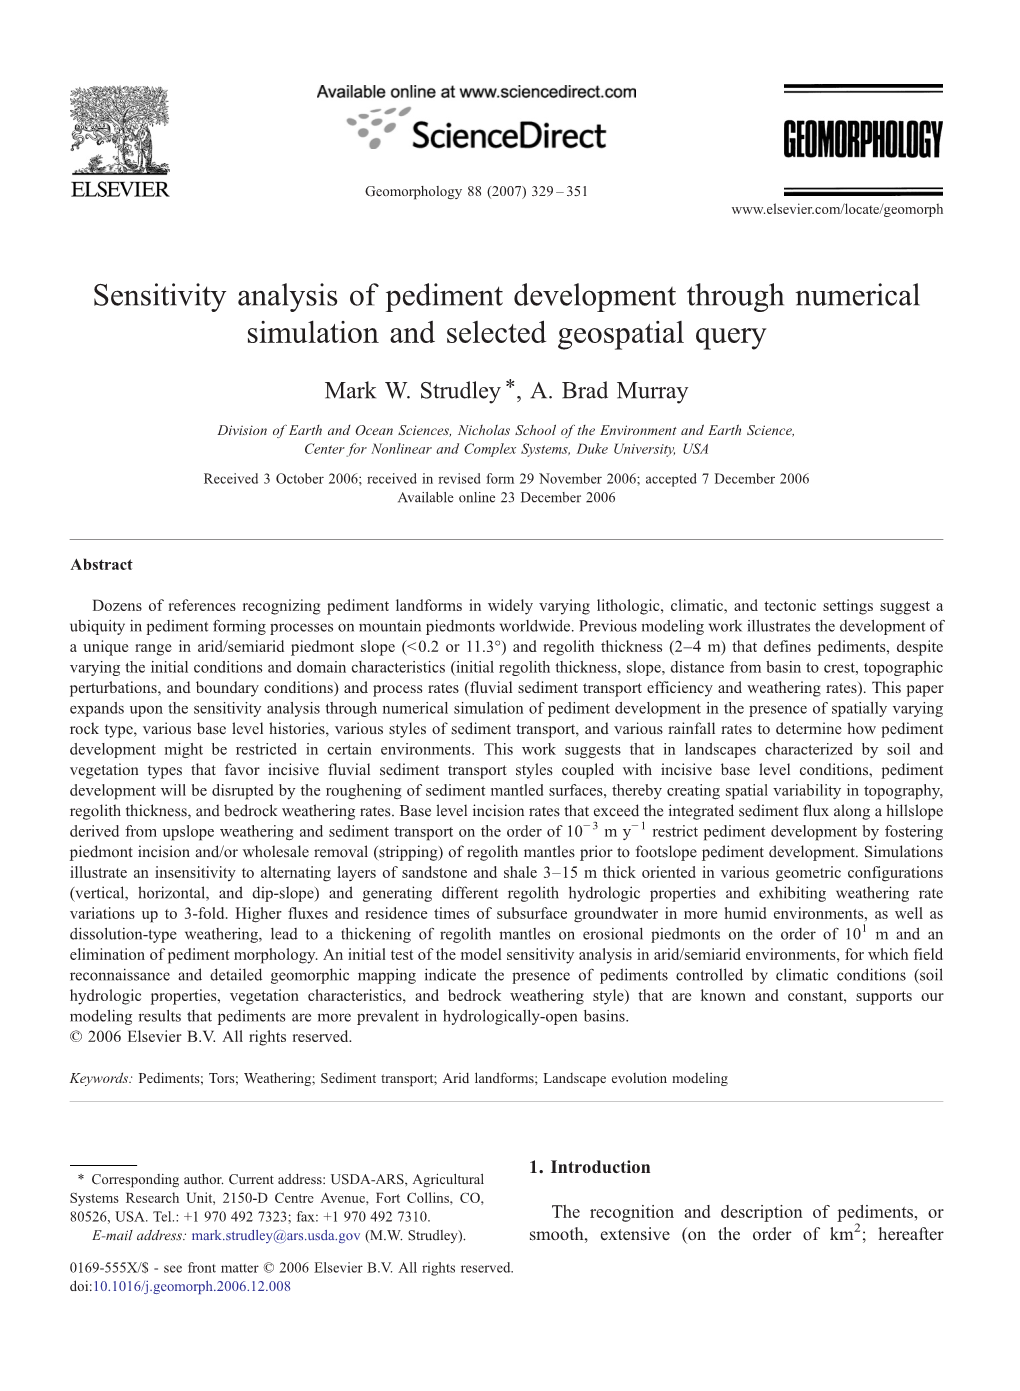 Sensitivity Analysis of Pediment Development Through Numerical Simulation and Selected Geospatial Query ⁎ Mark W